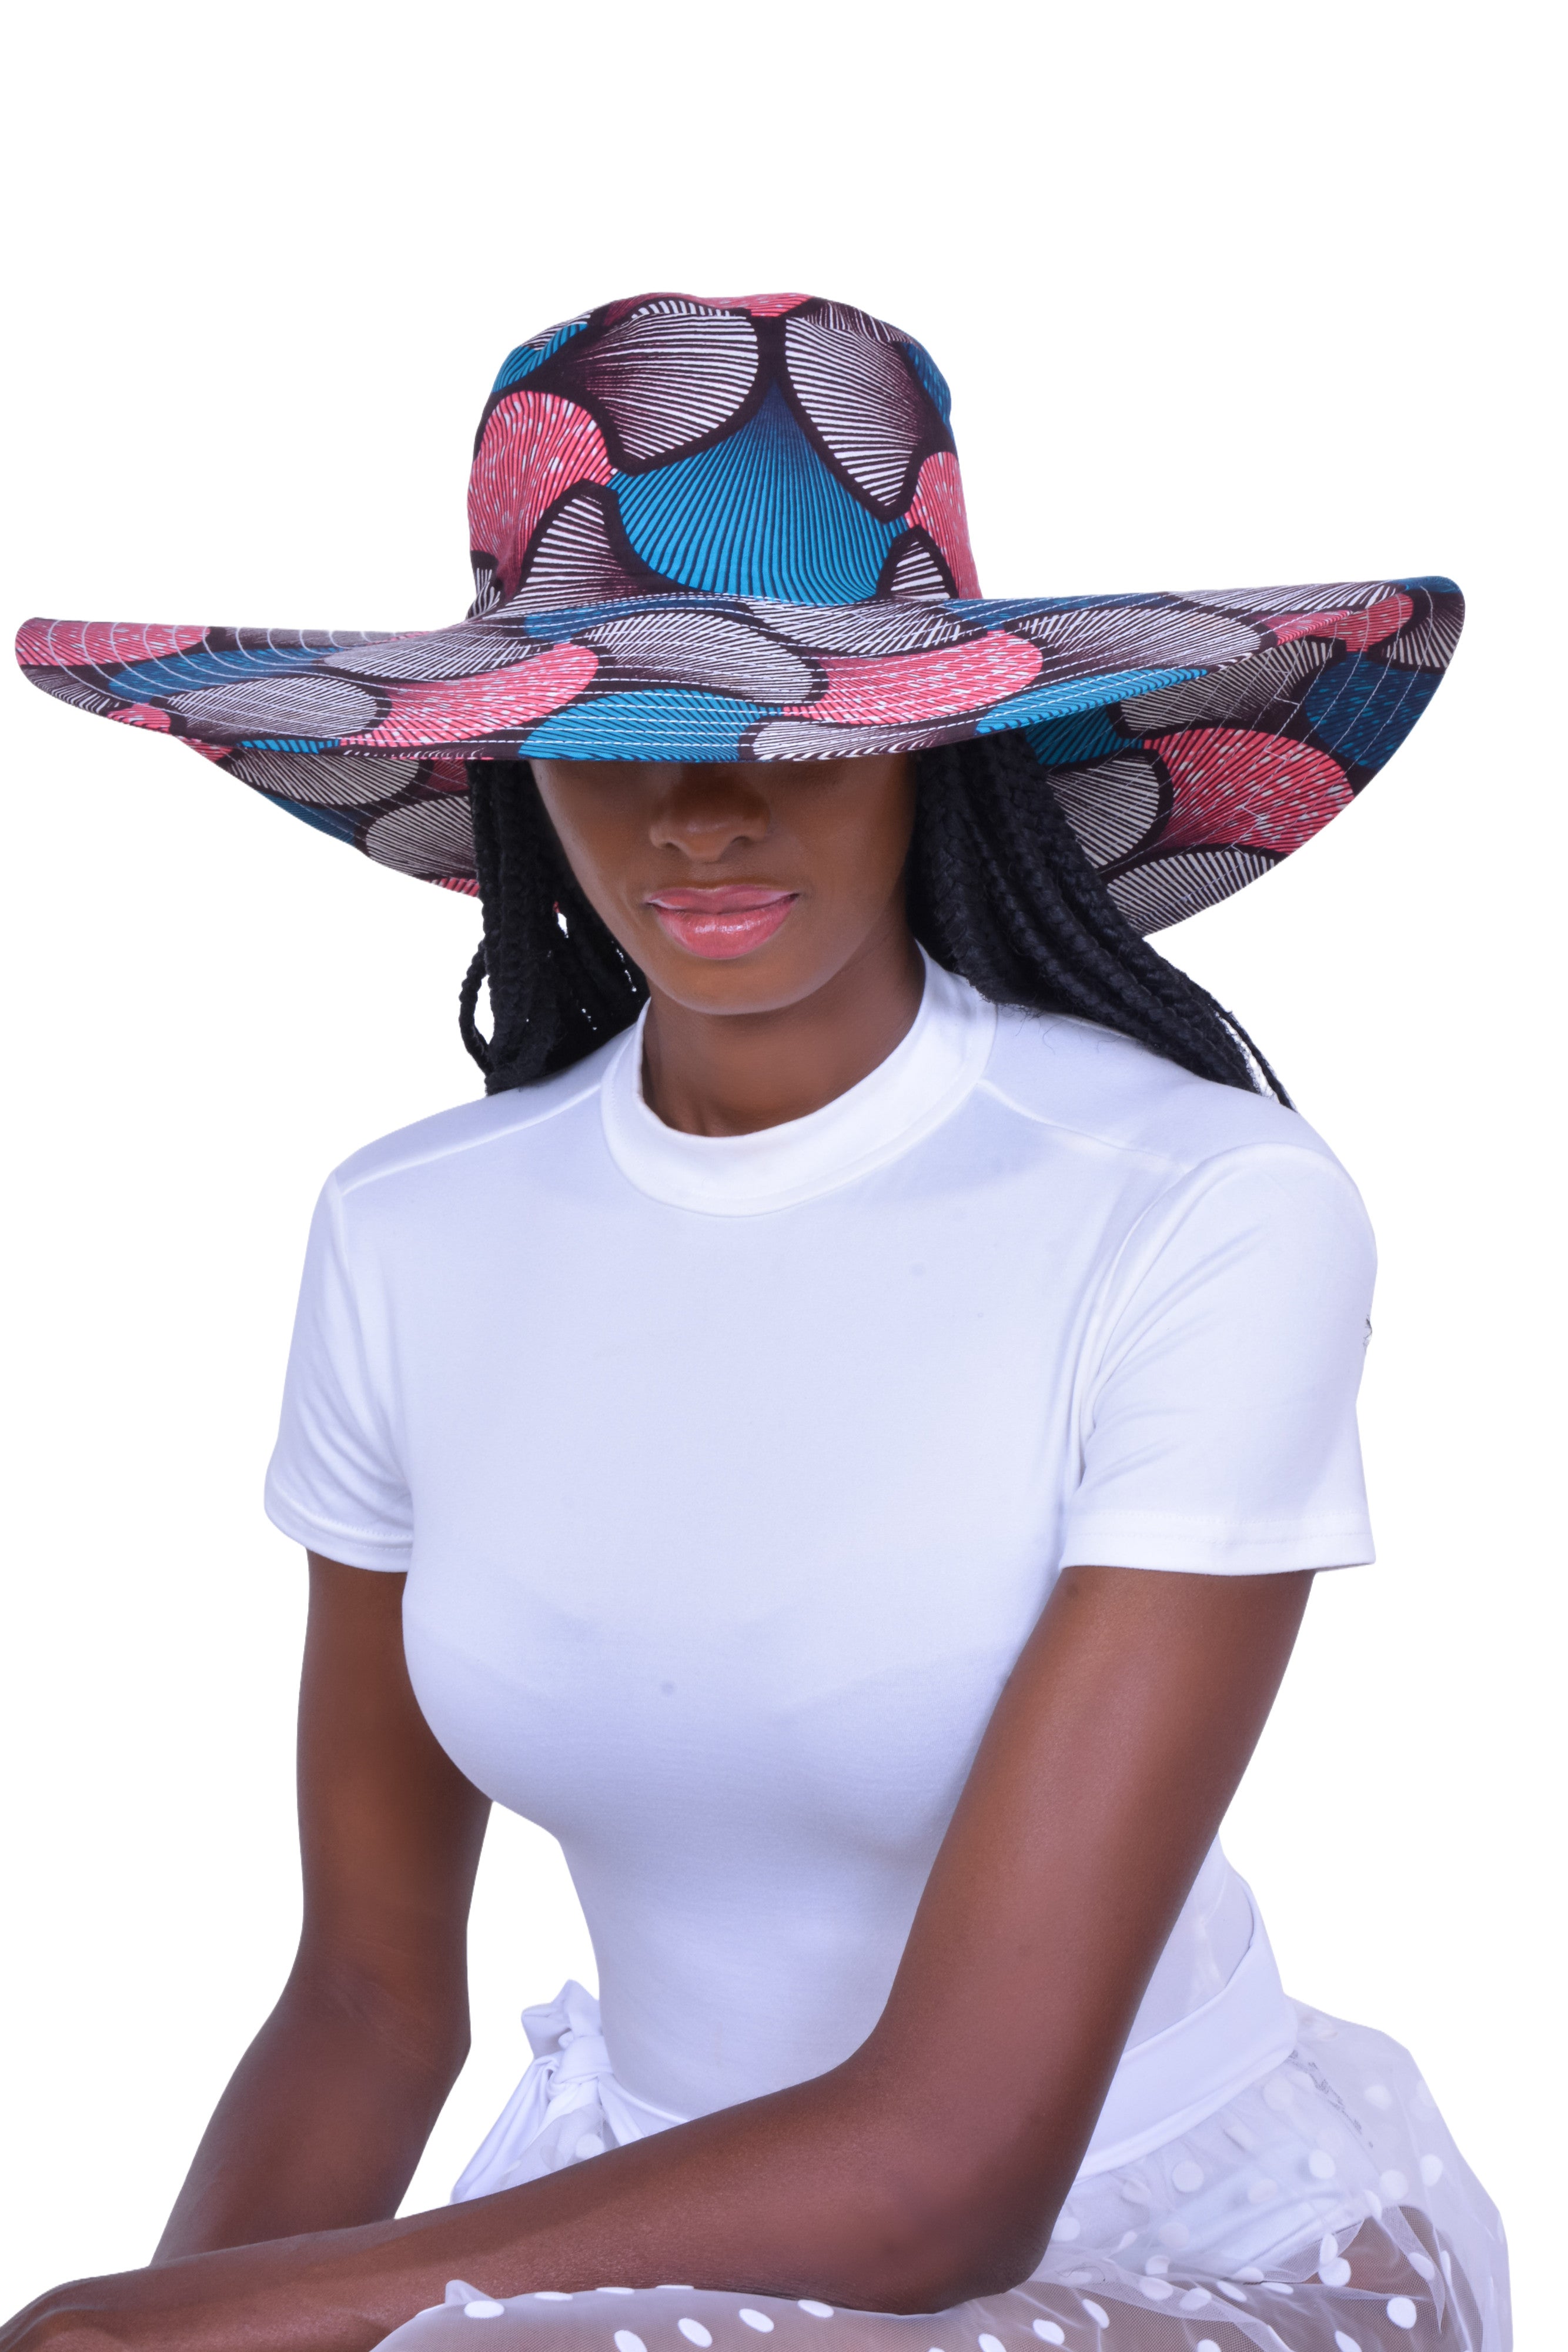 Jollo Uyoga Modern African Hat: let comfort and style give you the best shade.